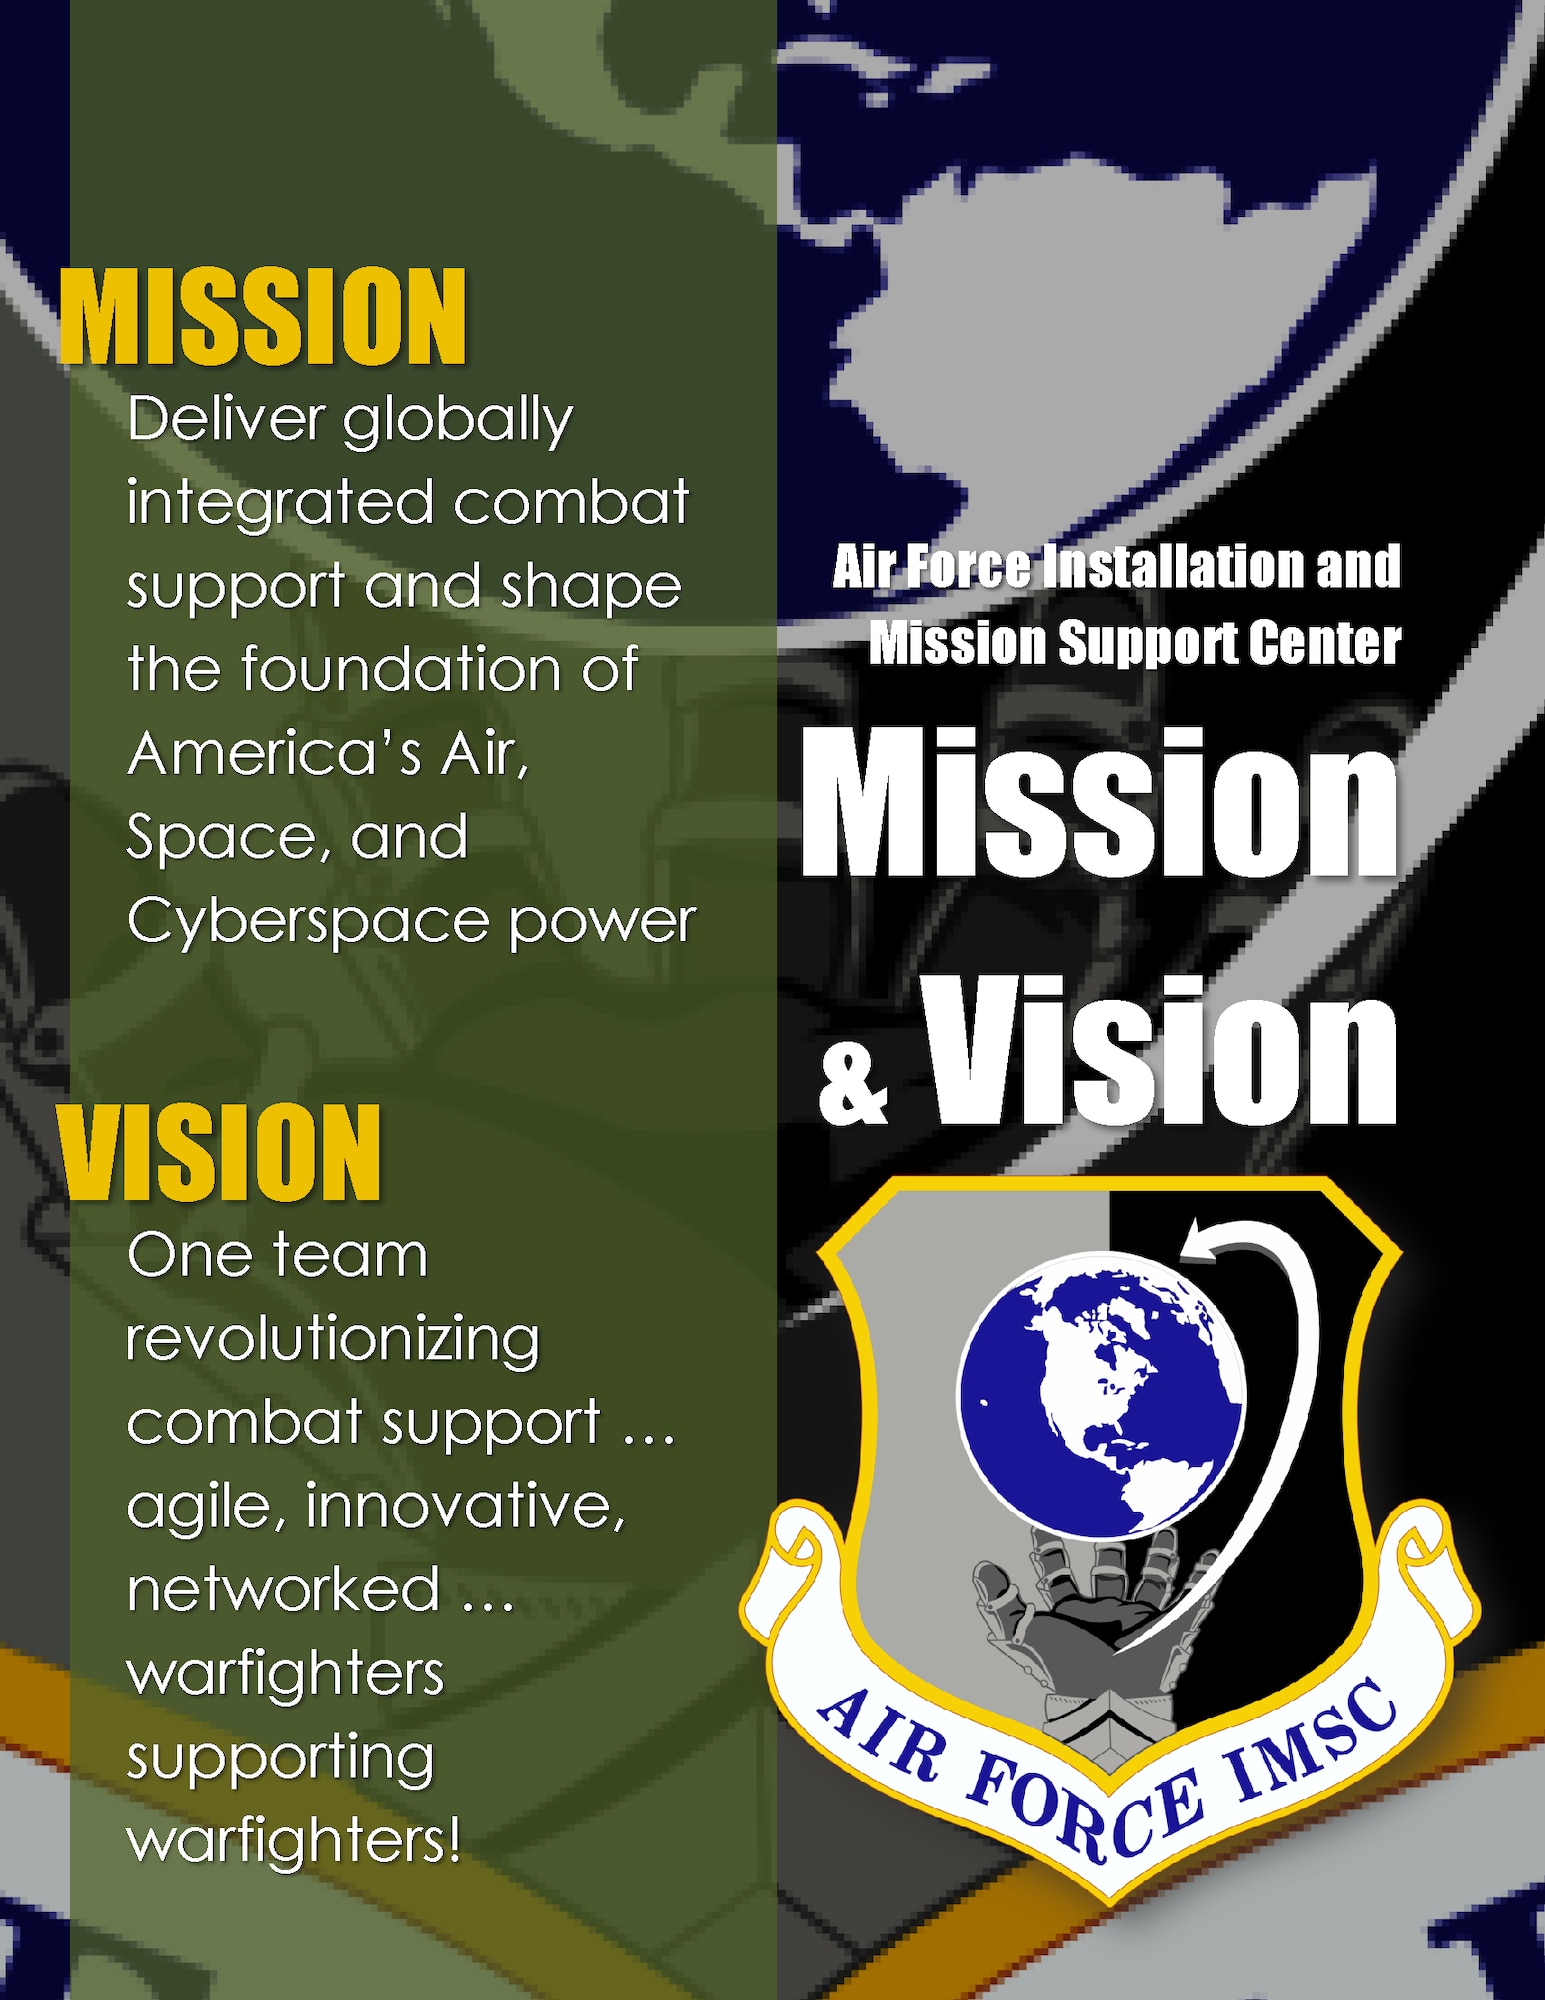 The mission of the AFIMSC is to “deliver globally integrated combat support and shape the foundation of America’s Air, Space, and Cyberspace power.” The unit’s vision is “one team revolutionizing combat support … agile, innovative, and networked … warfighters supporting warfighters!” “Our mission and vision capture our focus as we begin operations this fall,” said Maj. Gen. Theresa Carter, commander, Air Force Installation and Mission Support Center. “We’re entering a new era in the history of our Air Force. The AFIMSC mission and vision align with those of Air Force Materiel Command, our higher headquarters, and the Air Force in terms of the strategic emphasis on agility.” (U.S. Air Force illustration/Master Sgt. Christian Michael)